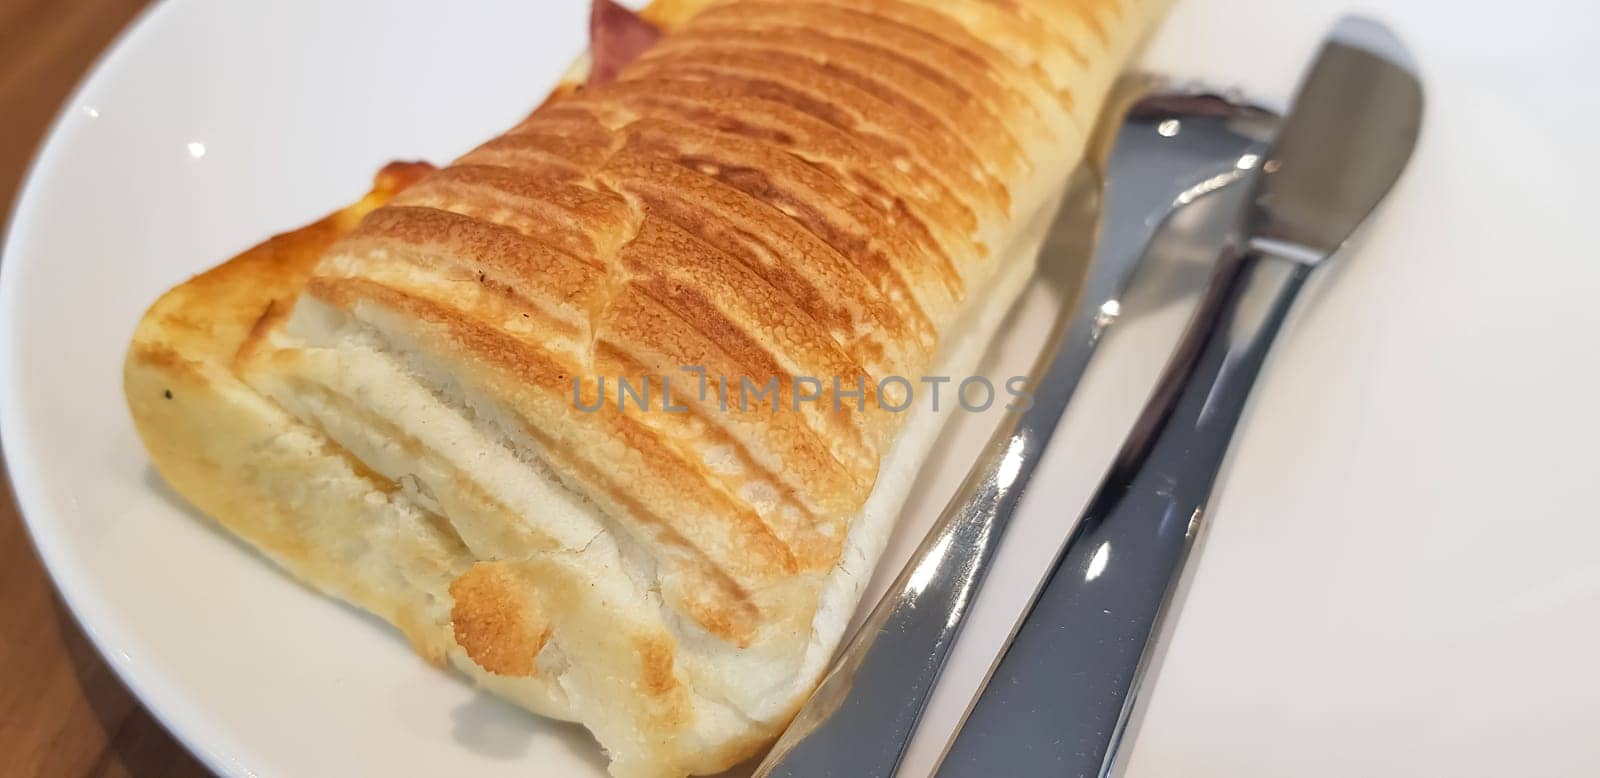 Grilled smoked beef mushroom Panini or sandwich served with white plate on the wooden table, in a famous restaurant